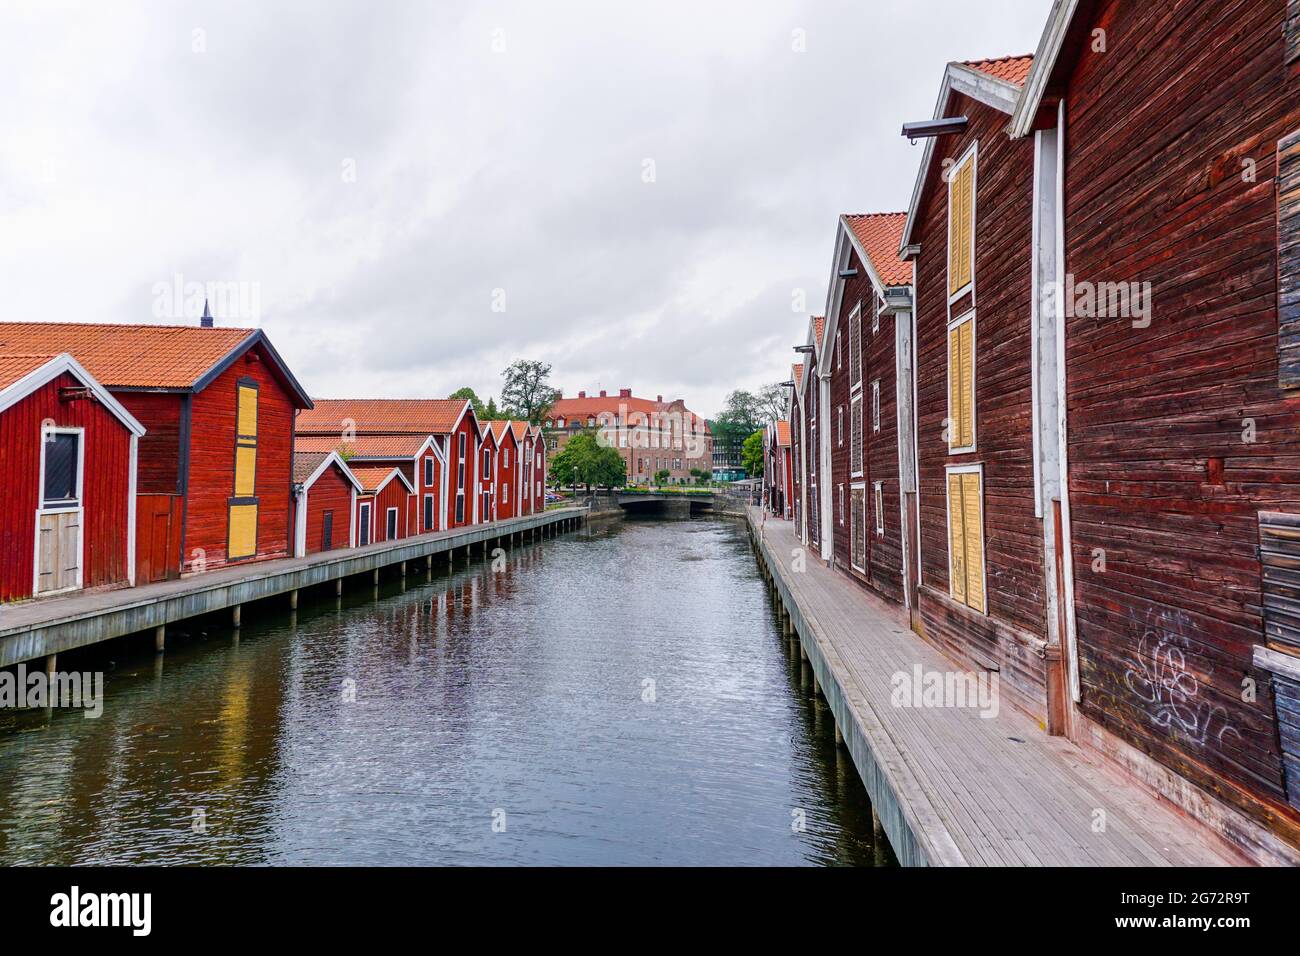 Hudiksvall, Sweden - 7 July, 2021: colorful wooden buildings line the canal in downtown Hudiskvall Stock Photo